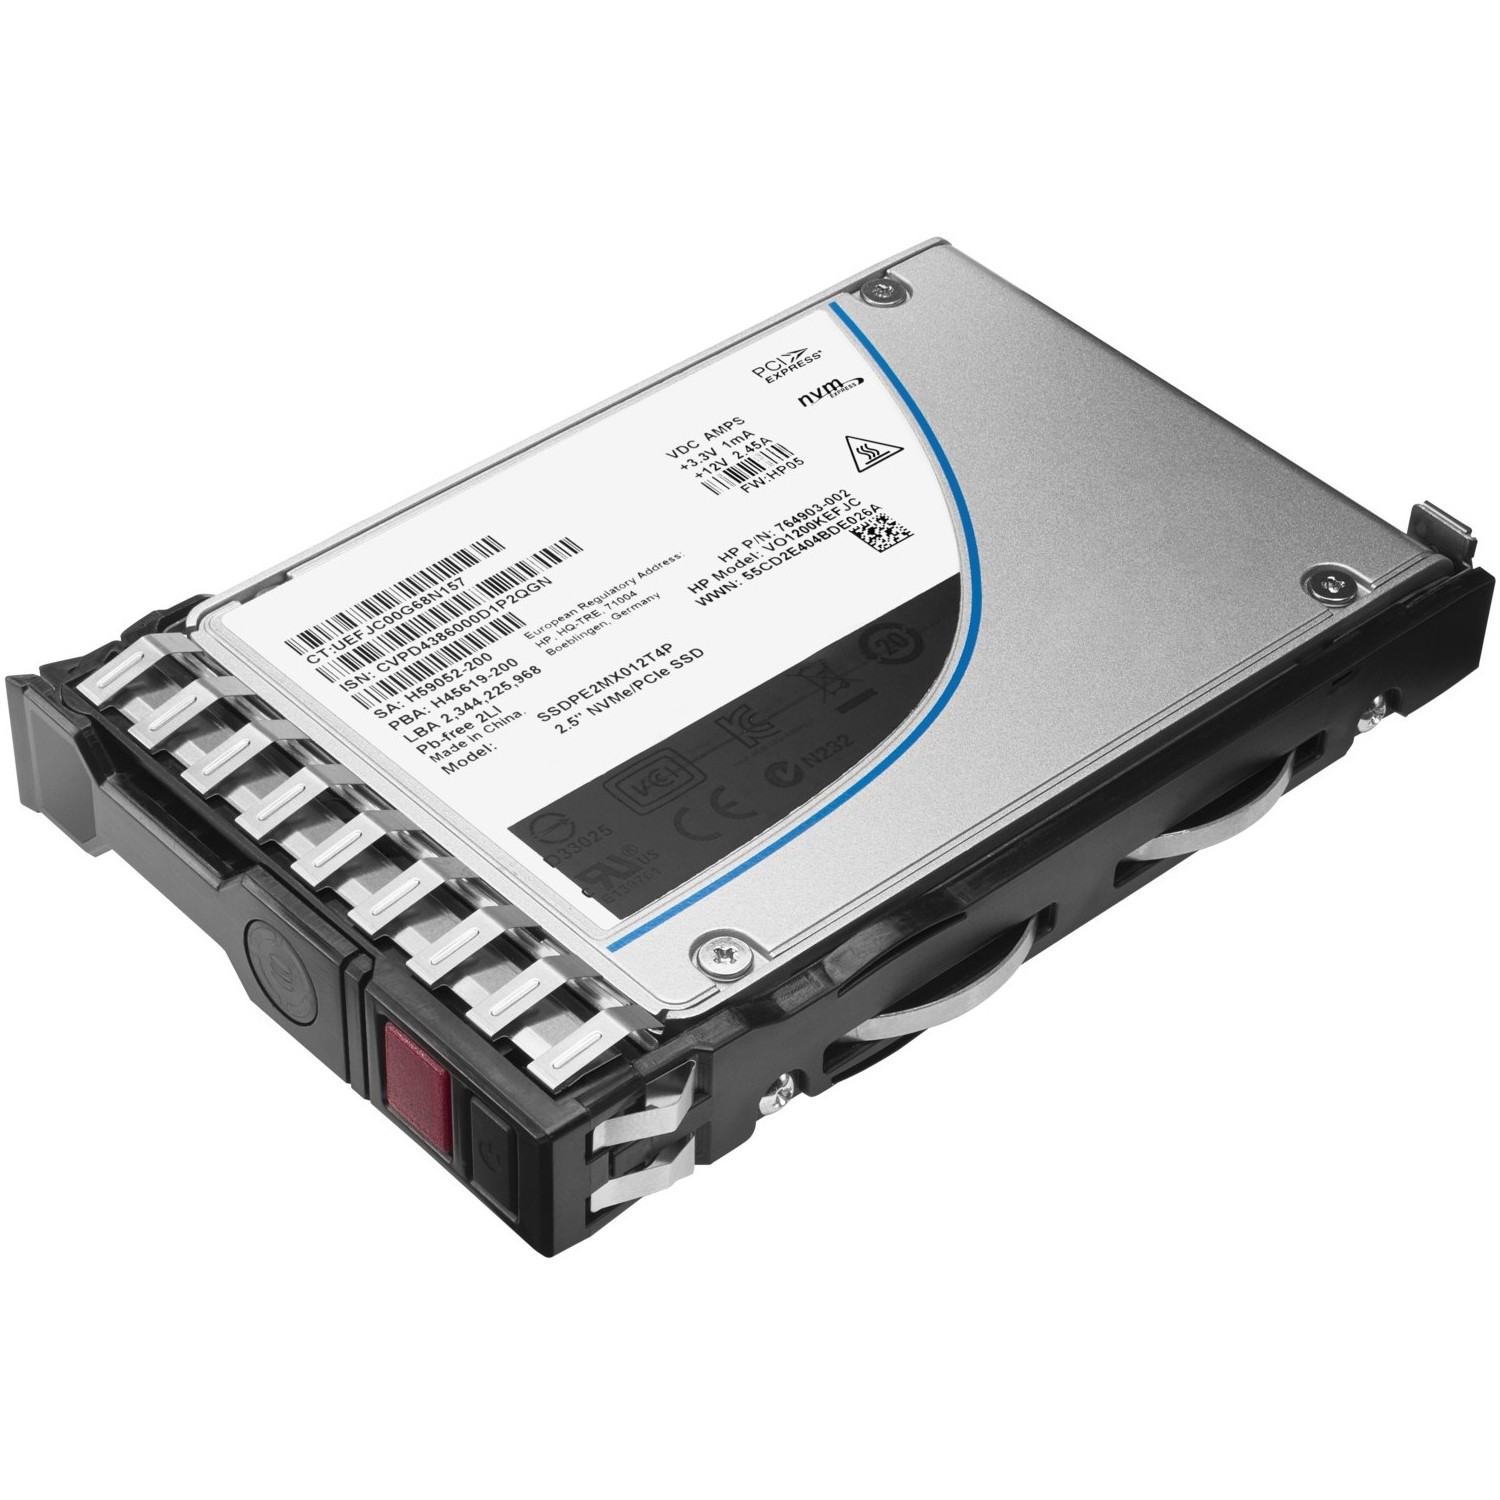 P09685-B21 - HPE 240GB SATA 6G Read Intensive SFF (2.5in) RW 3yr Wty Digitally Signed Firmware SSD (HPE MicroServer Gen10 Slim SFF SATA Enablement Kit (870212-B21) to accommodate this SFF SSD into the media bay.)